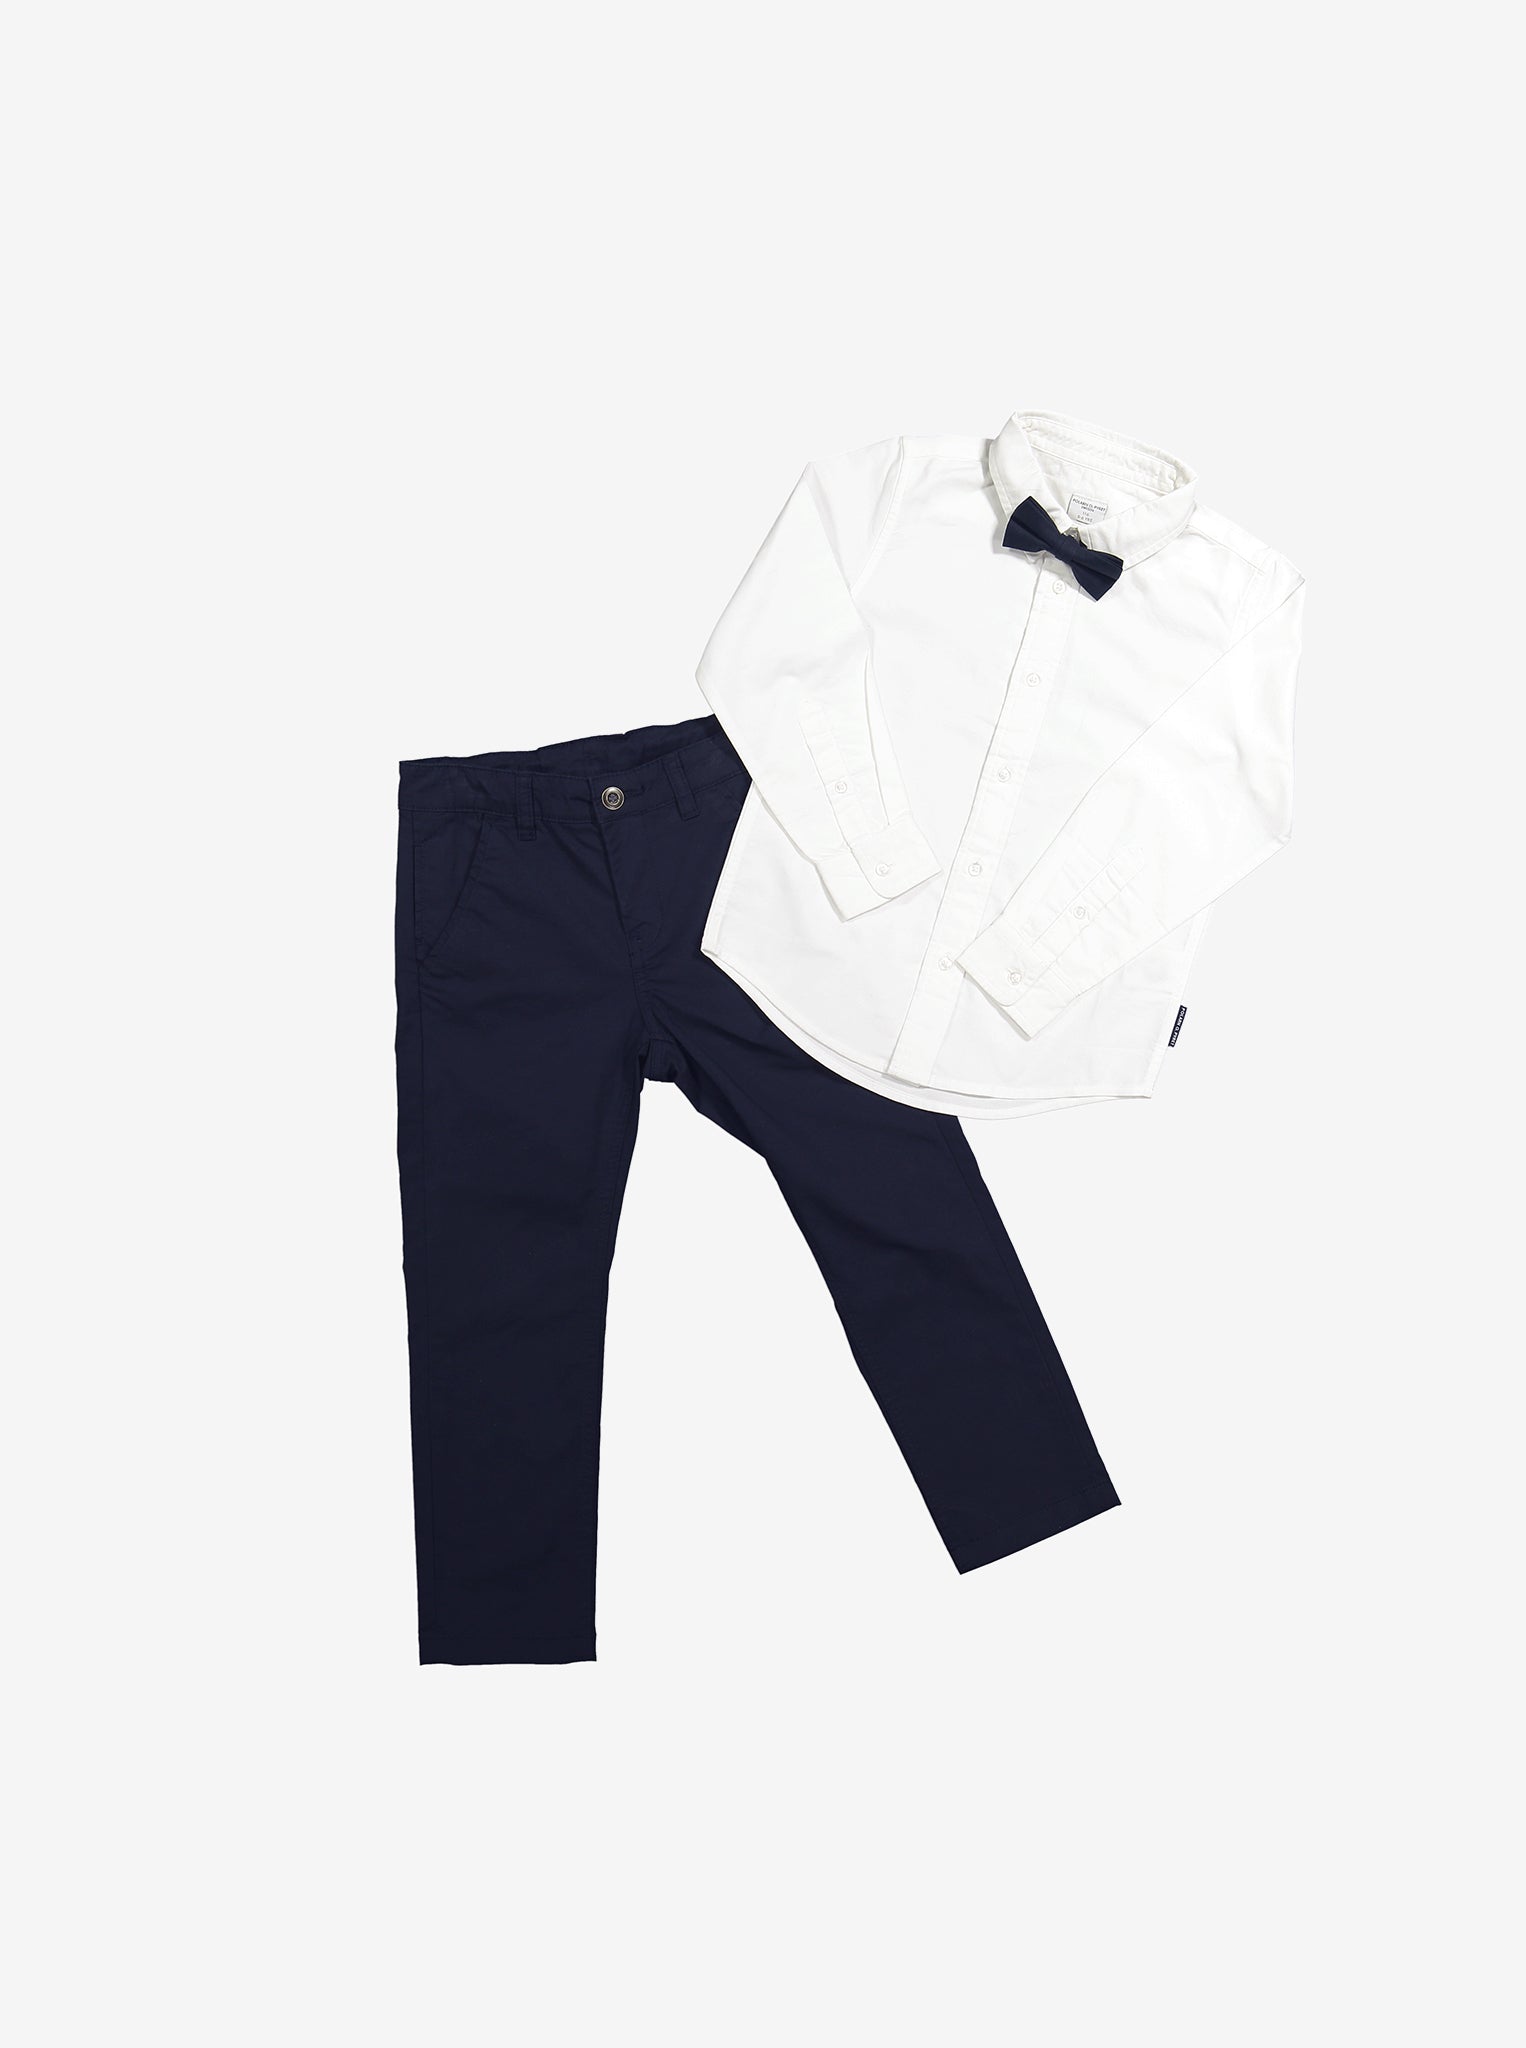 kids organic cotton navy bow tie, adjustable easy use, ethical kids clothes  with shirt and trousers 